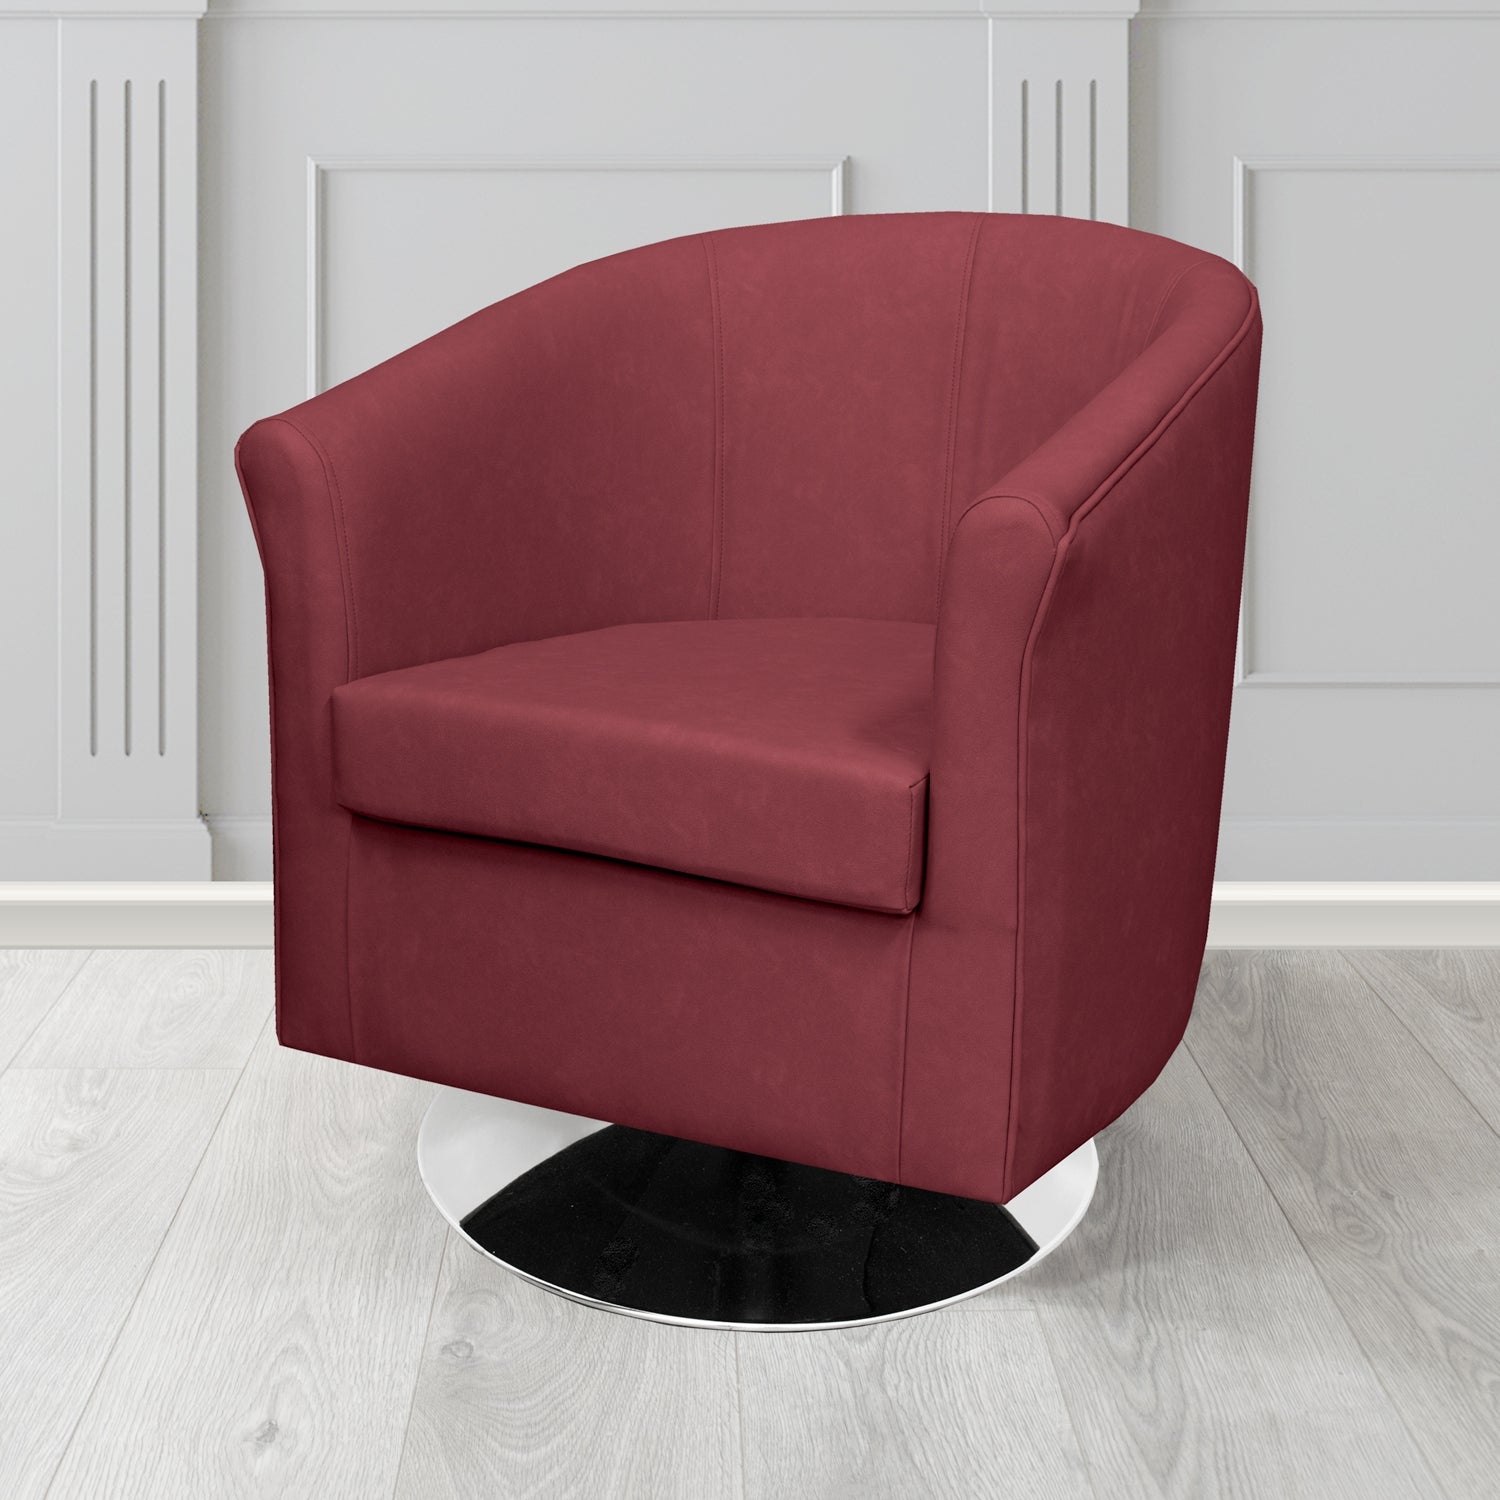 Tuscany Swivel Tub Chair in Infiniti Bordeaux INF1857 Antimicrobial Crib 5 Faux Leather - The Tub Chair Shop